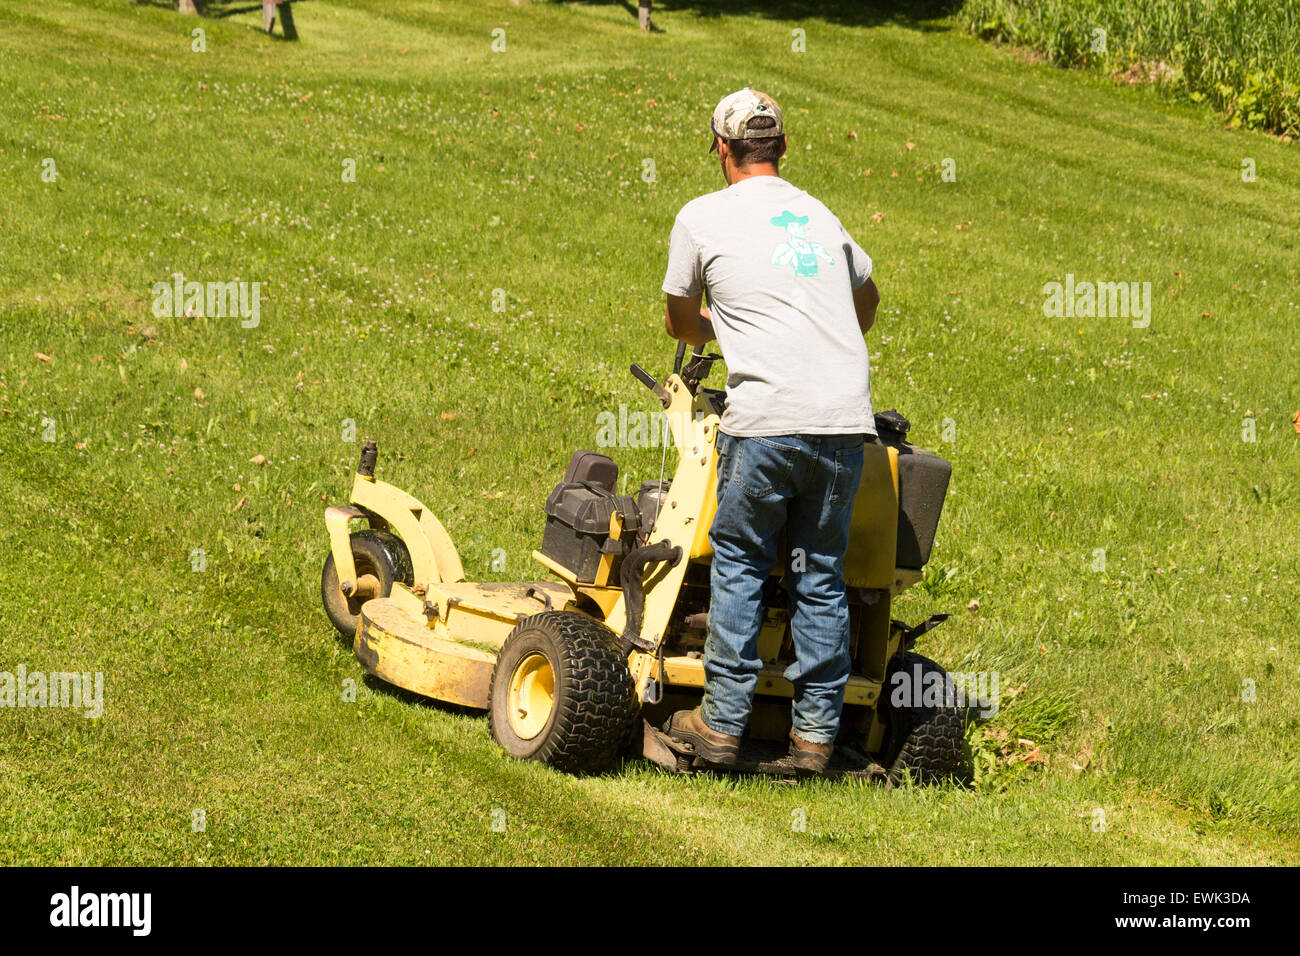 Man standing on lawn tractor mowing a large lawn Stock Photo